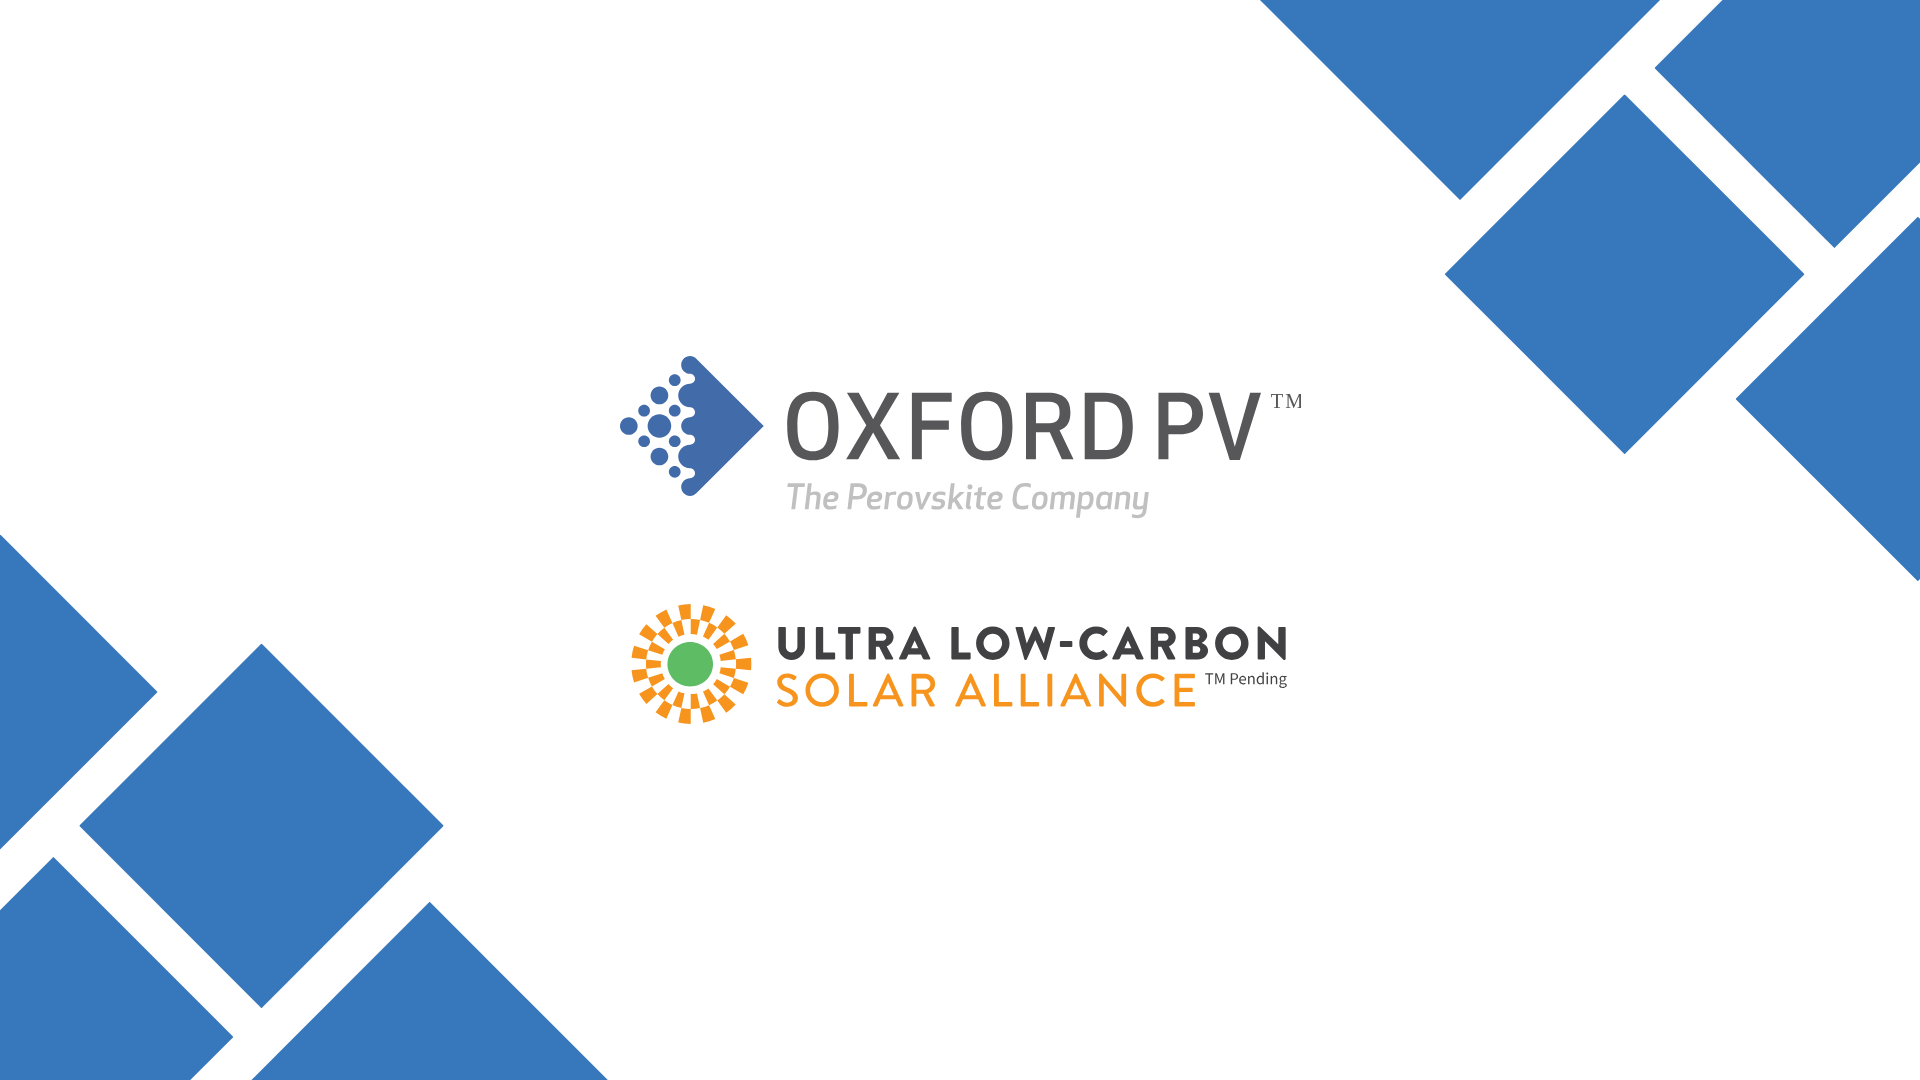 Oxford PV joins the Ultra Low-Carbon Solar Alliance